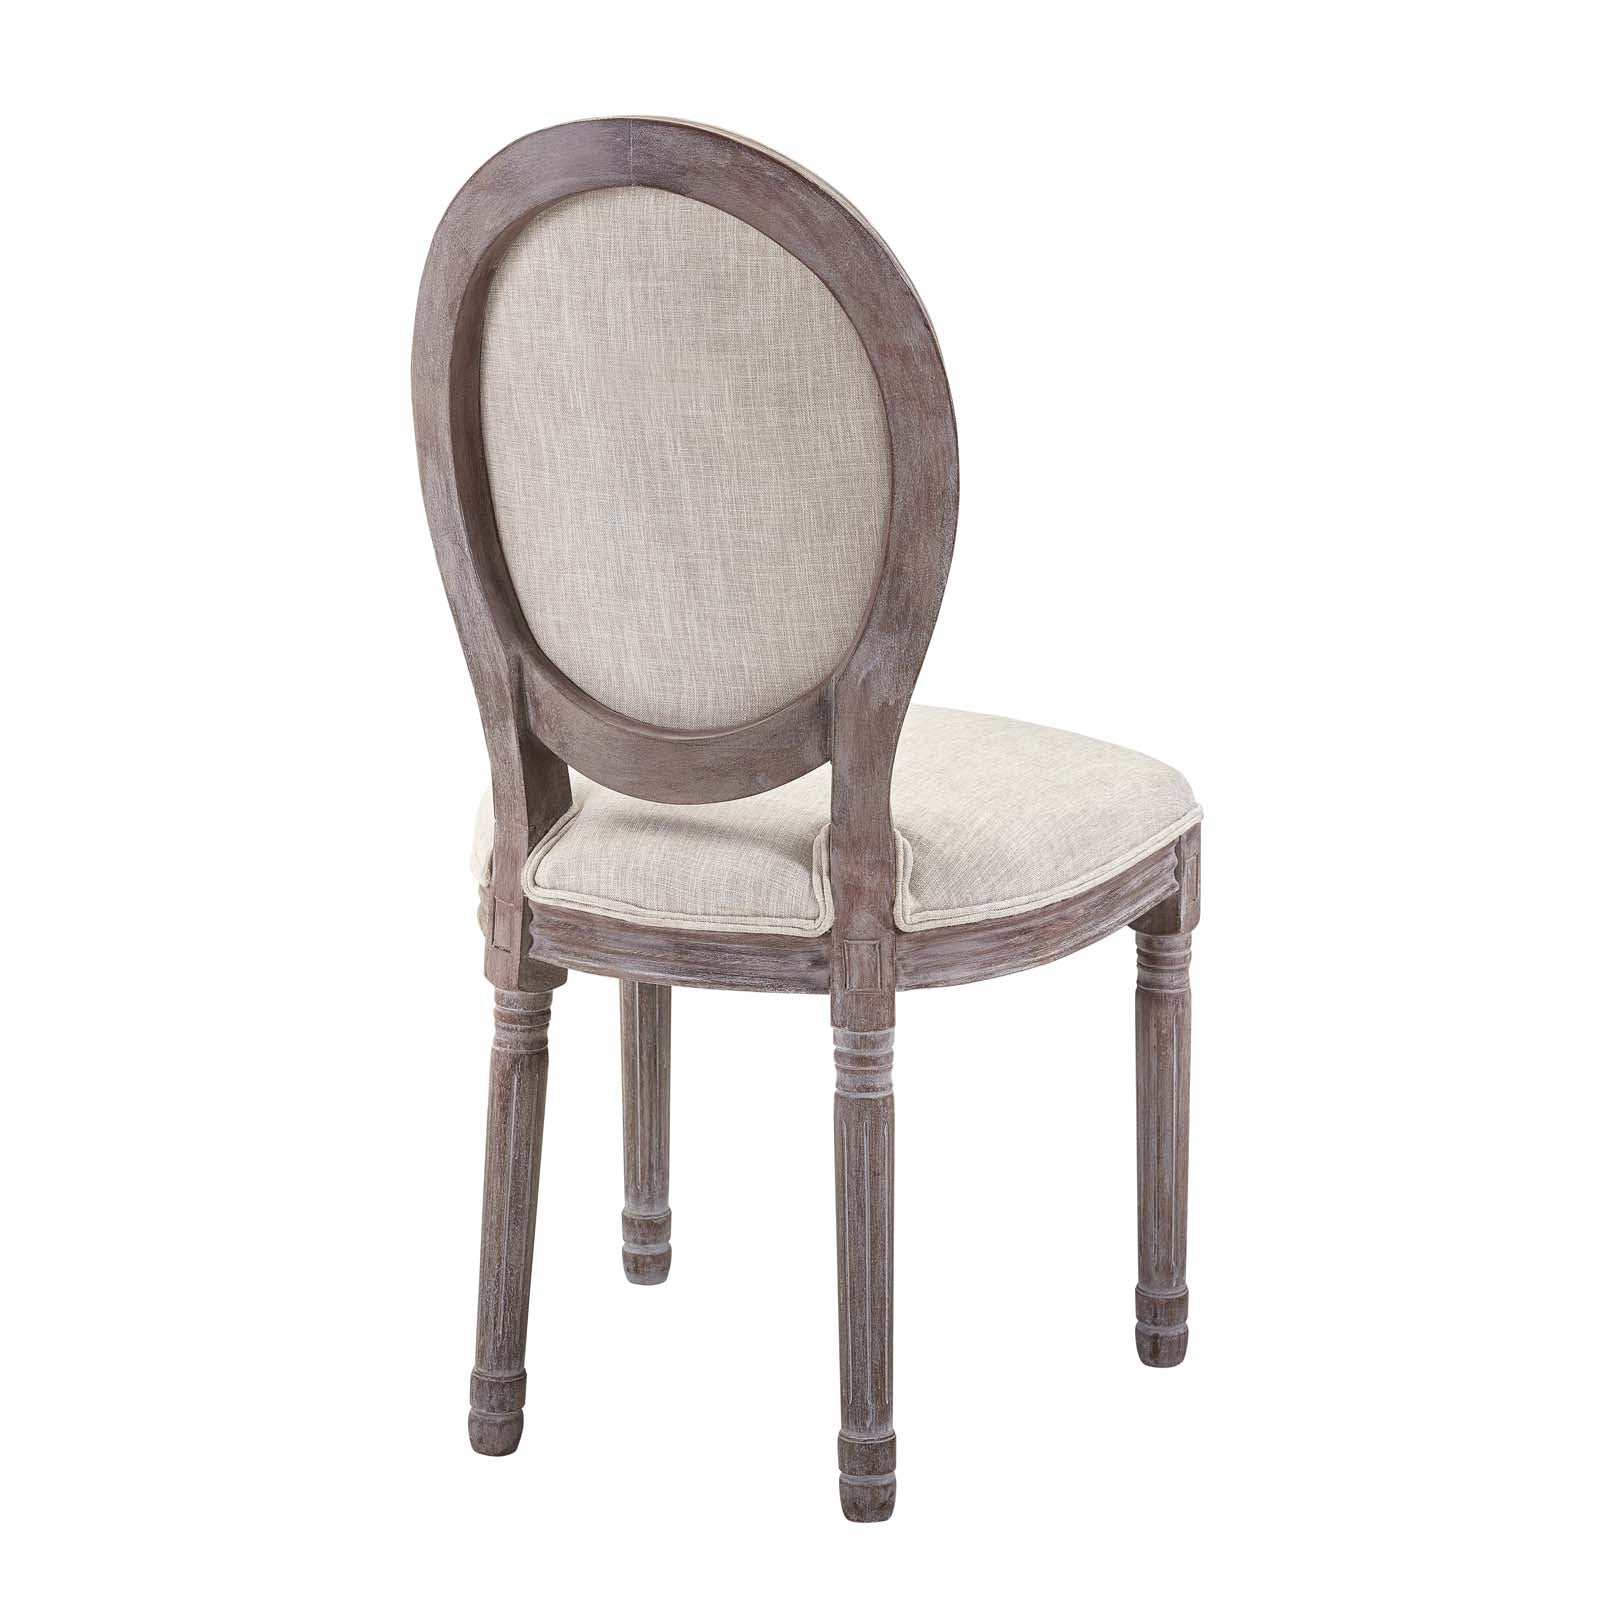 Arise Vintage French Upholstered Fabric Dining Side Chair Set of 2 - East Shore Modern Home Furnishings